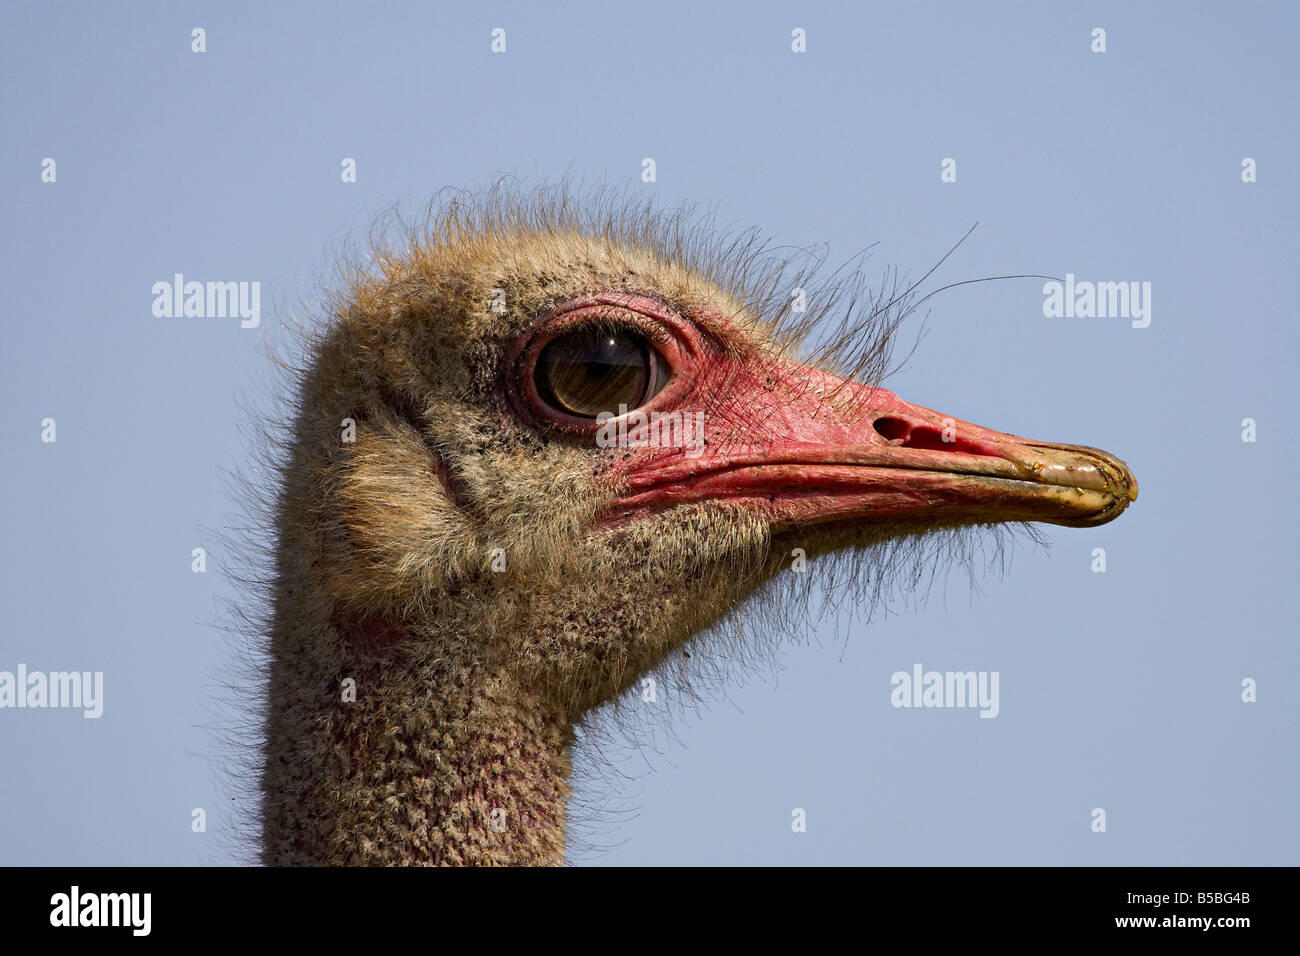 Common ostrich (Struthio camelus), Addo Elephant National Park, South Africa, Africa Stock Photo